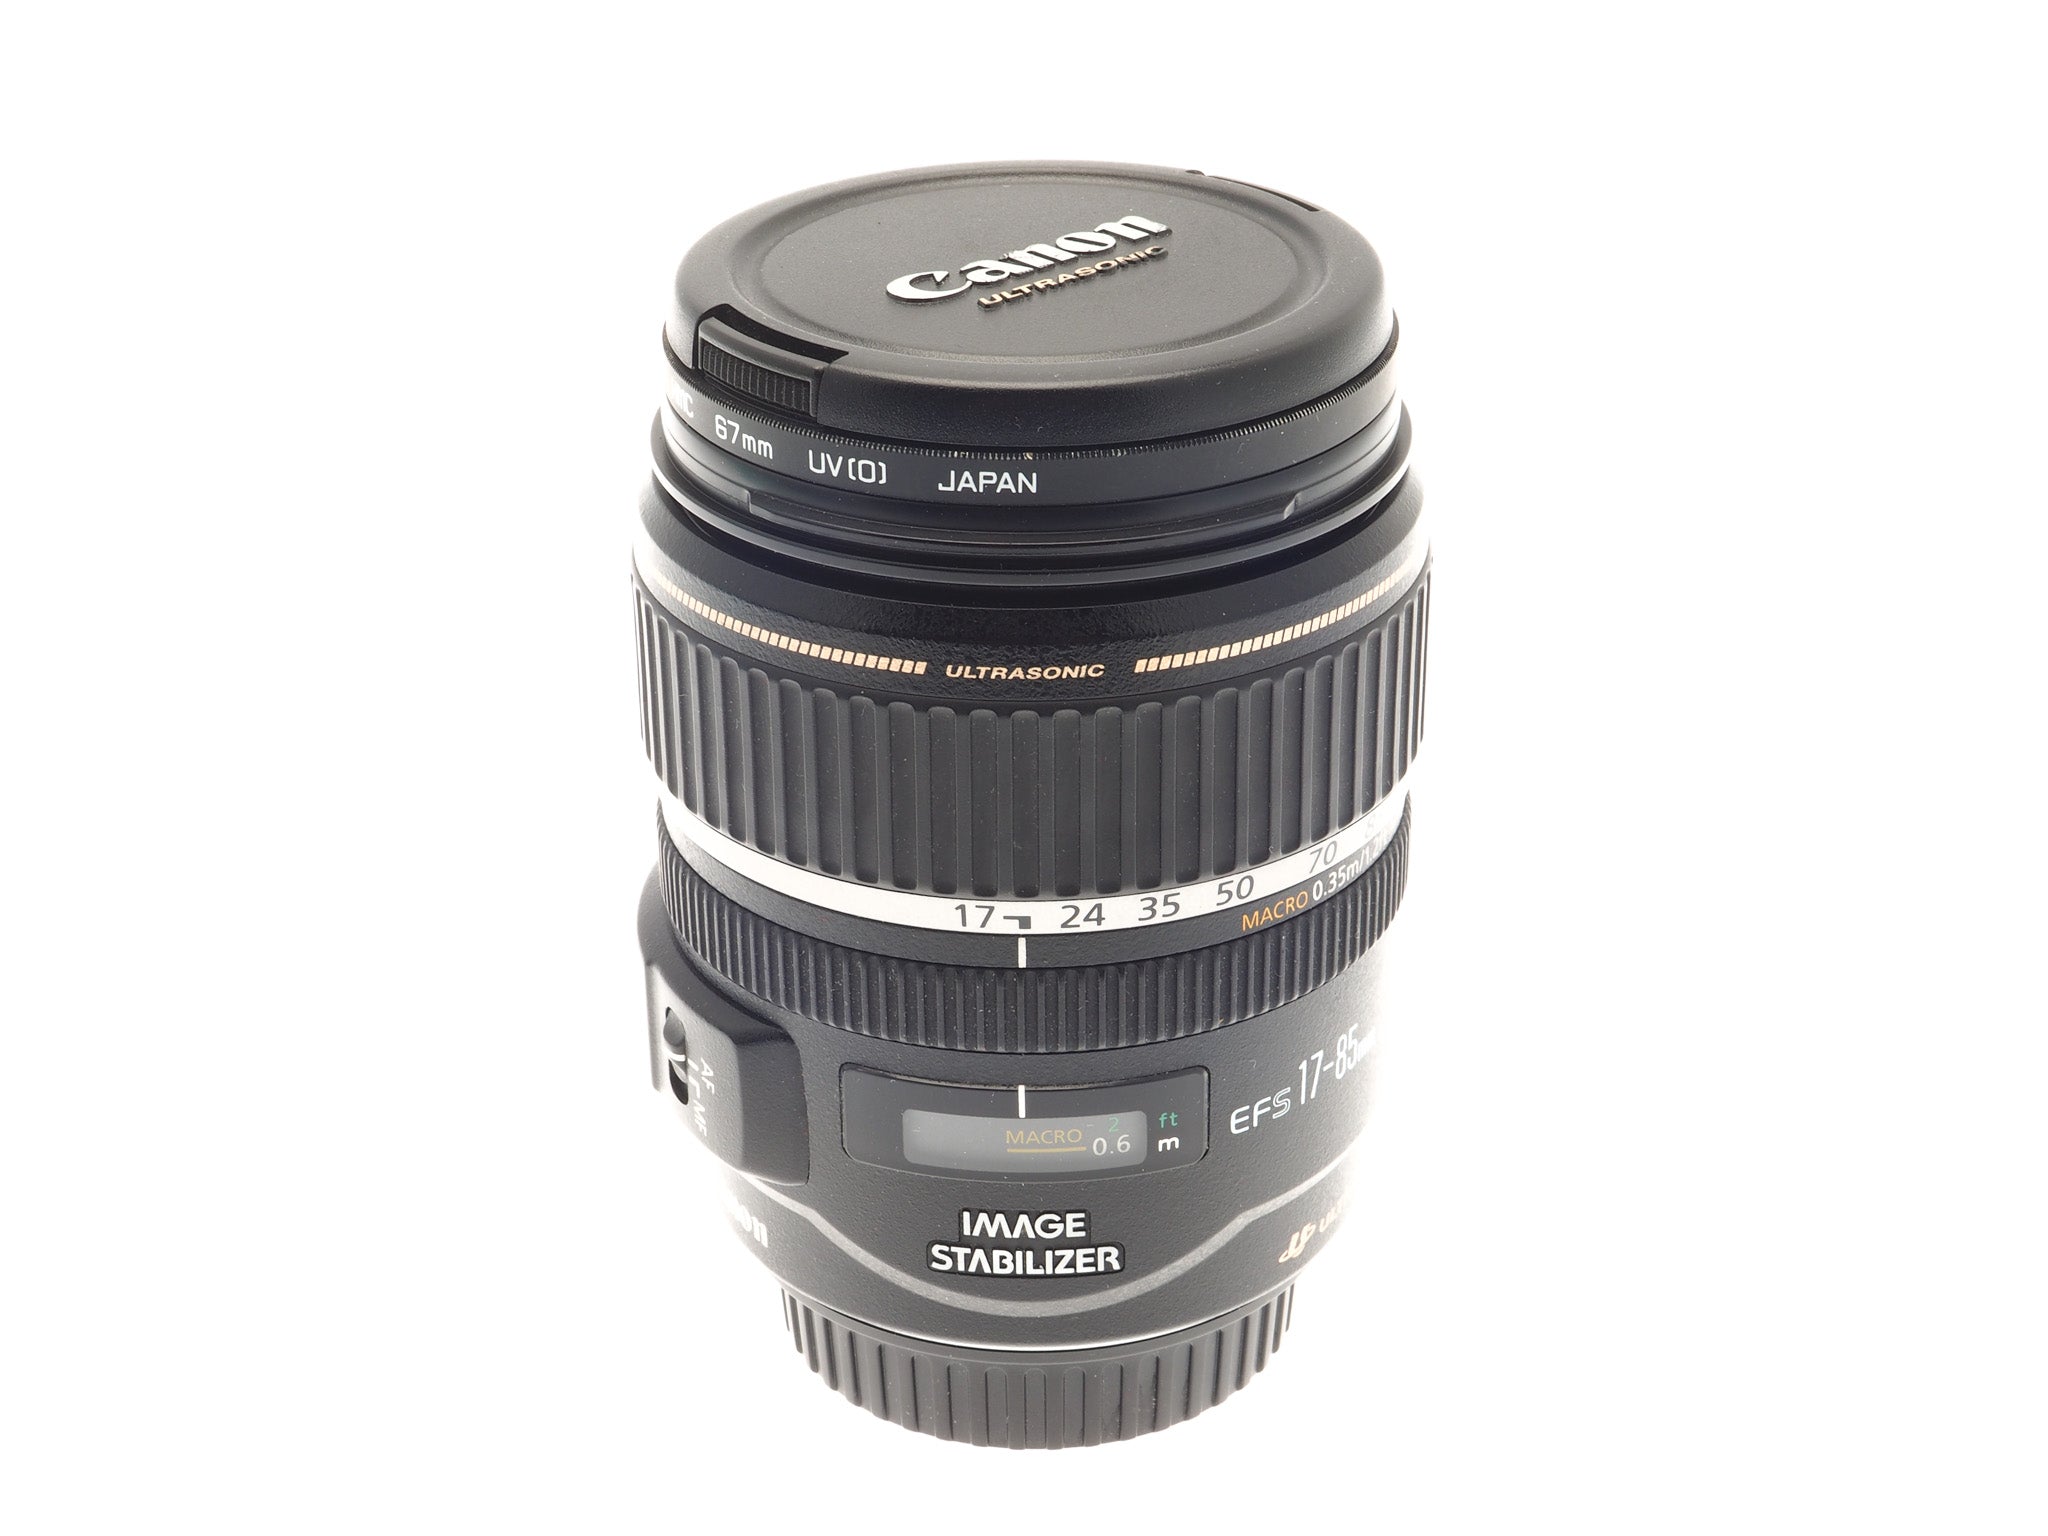 Canon 17-85mm f4-5.6 IS USM - Lens